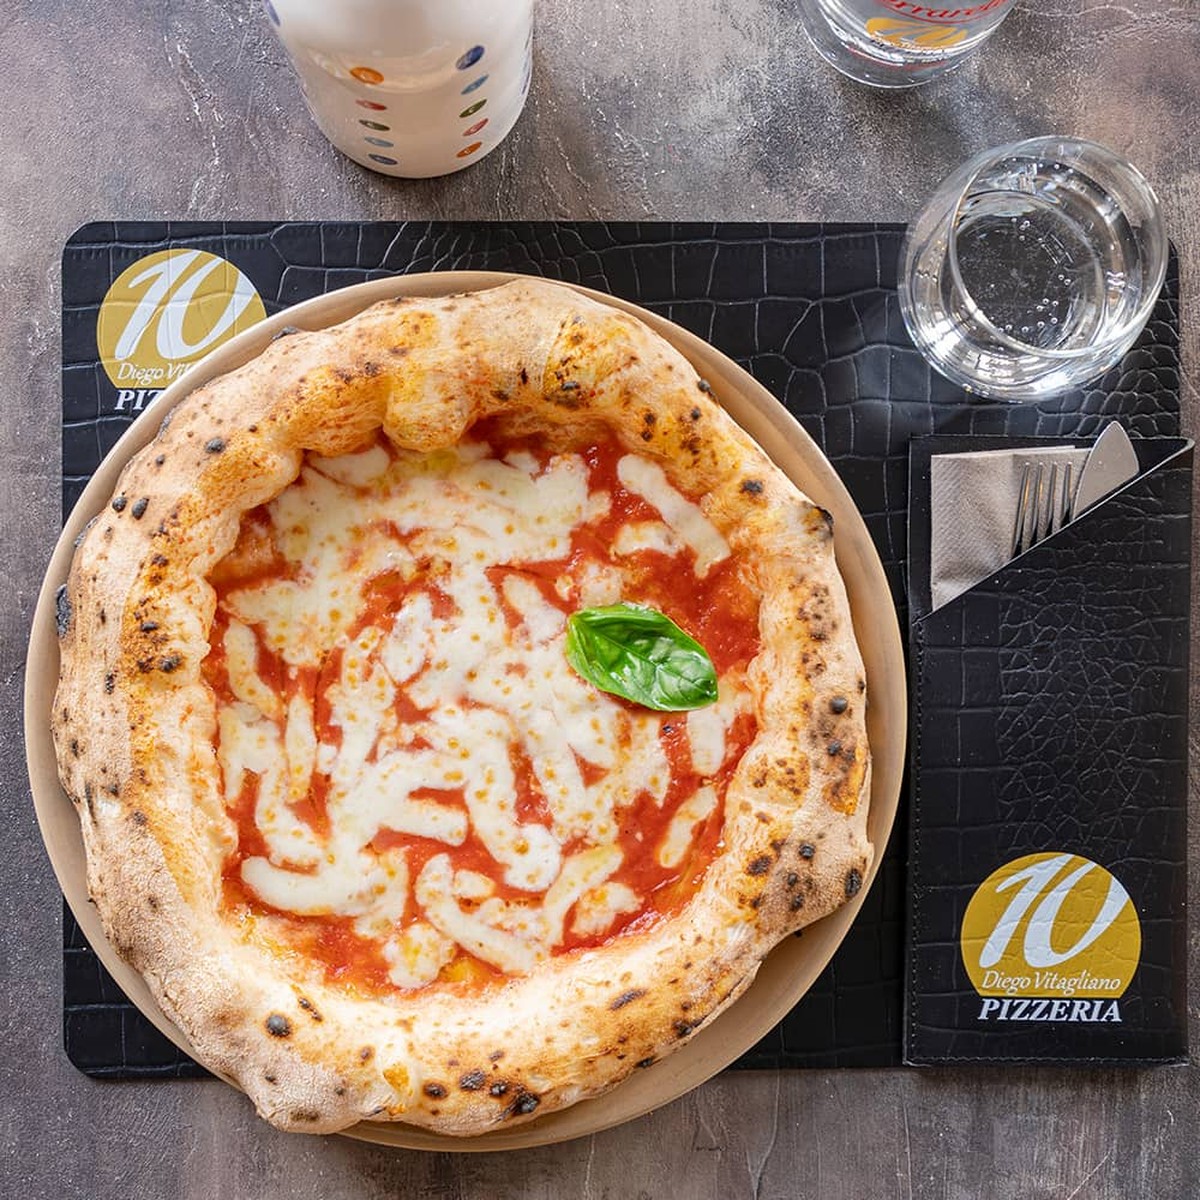 How much does it cost to eat in the best pizzerias in the world in 2023?